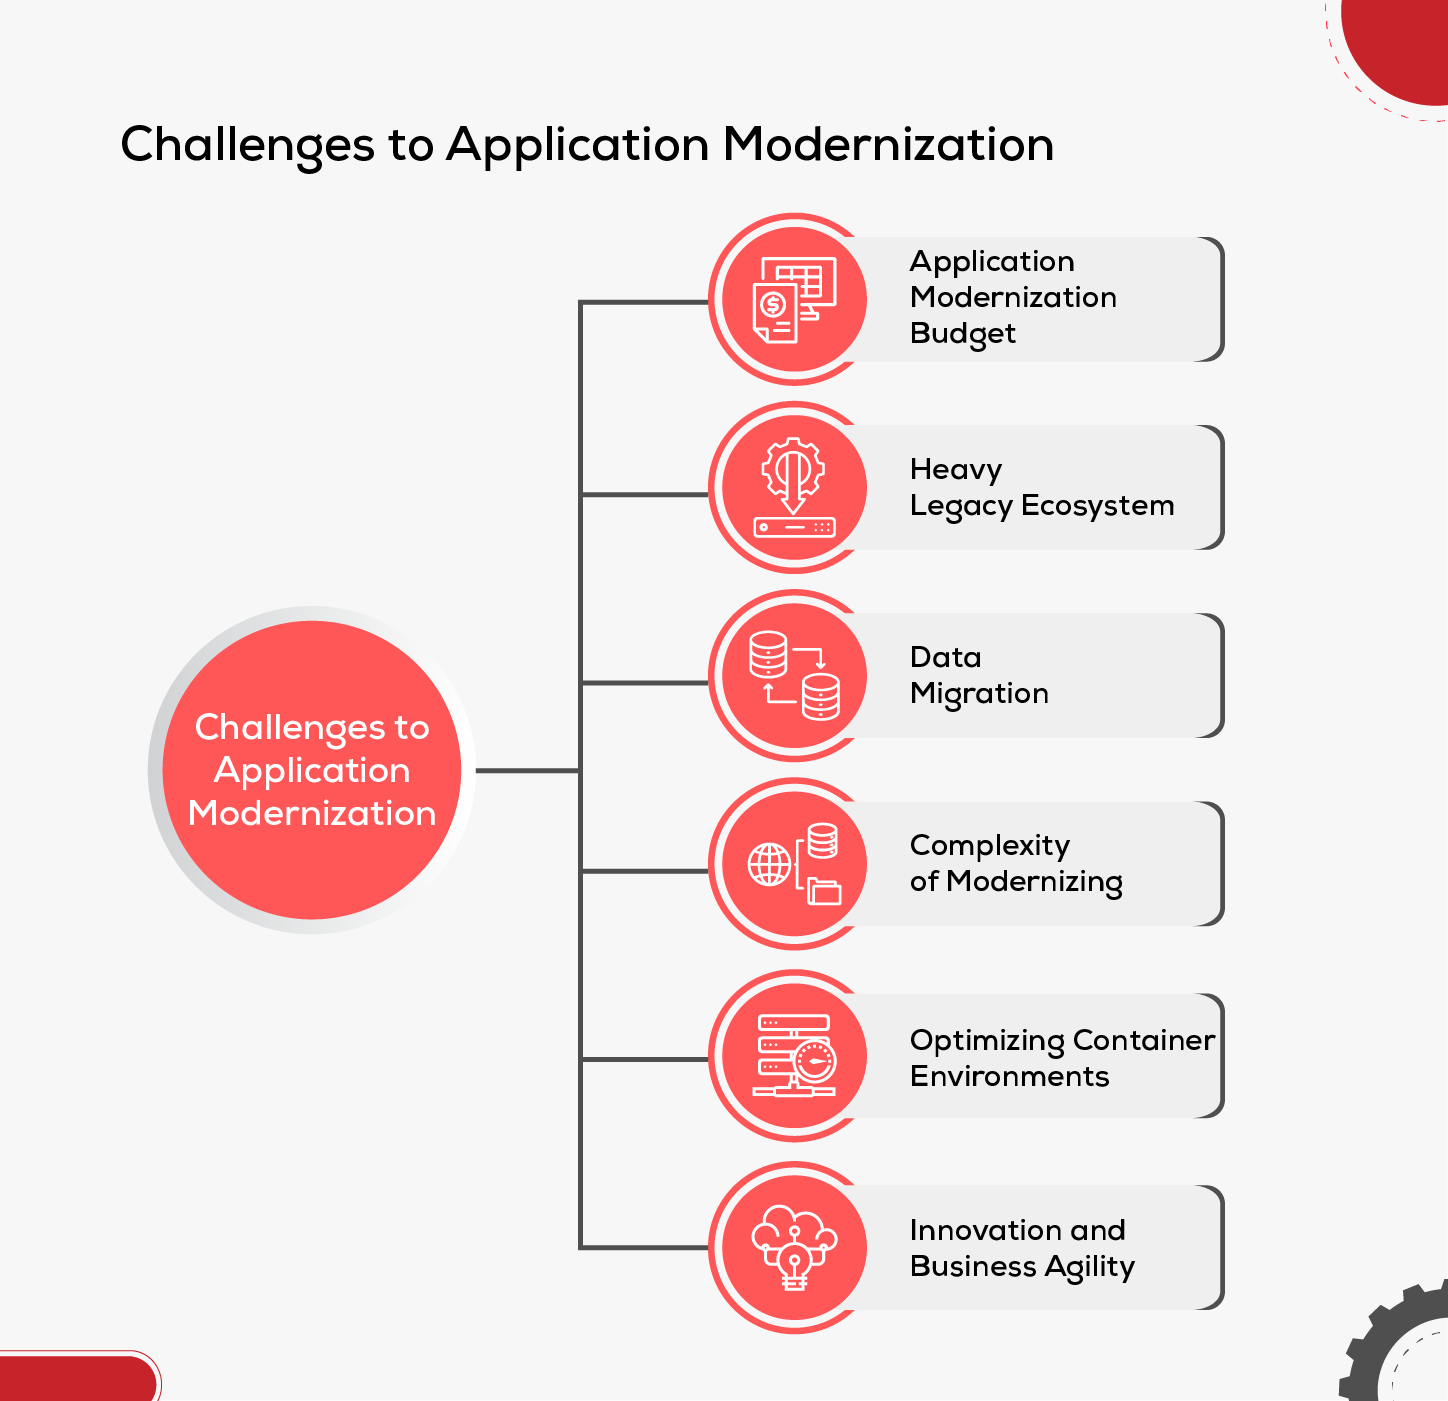 Challenges to Application Modernization